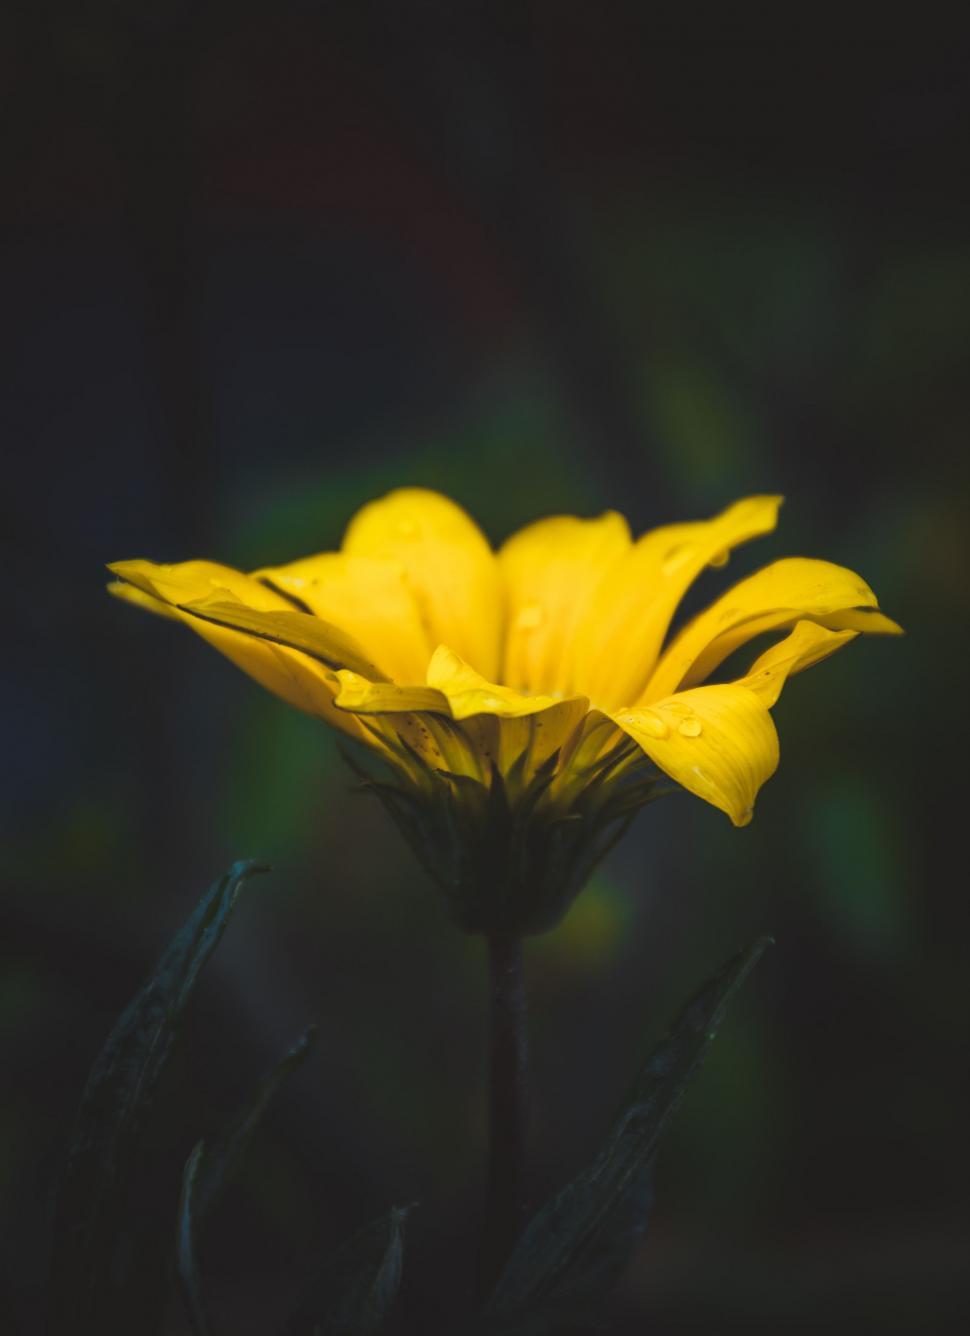 Free Image of Yellow Flower on Black Background 